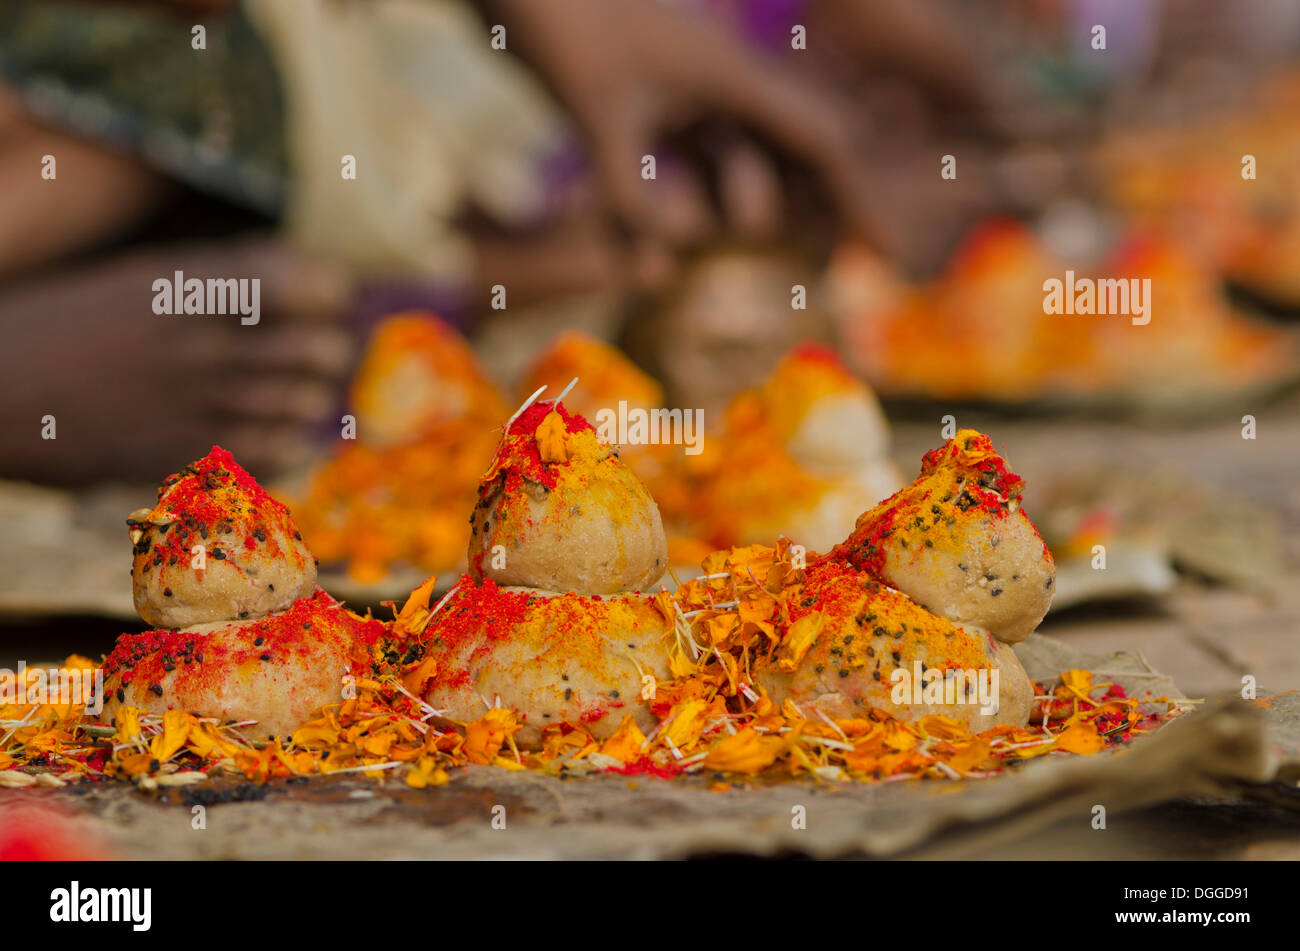 Rice balls and flowers as part of the ritual to pray farewell for the soul of a deceased person, at the ghats of Varanasi, India Stock Photo